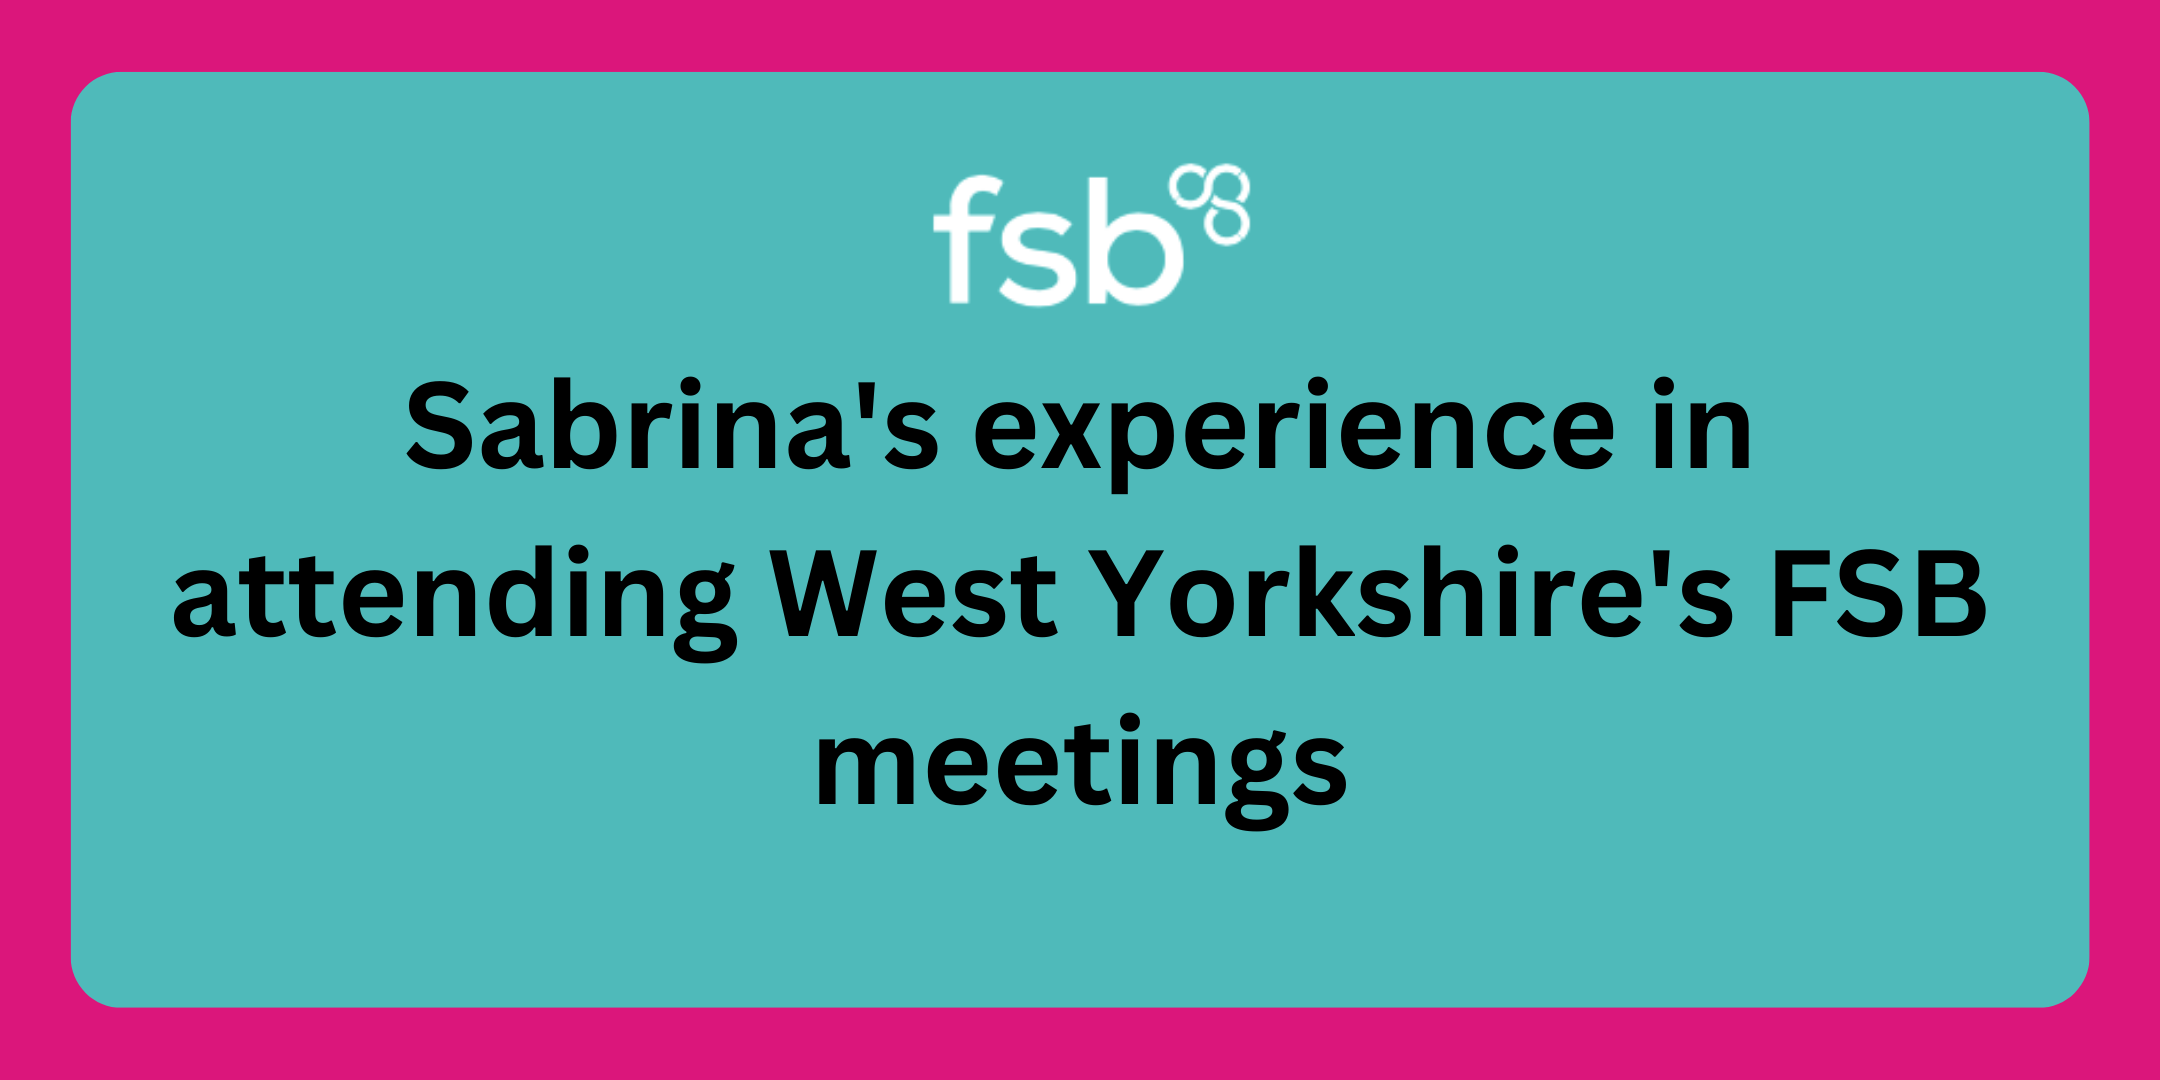 Sabrina’s experience in attending FSB networking meetings